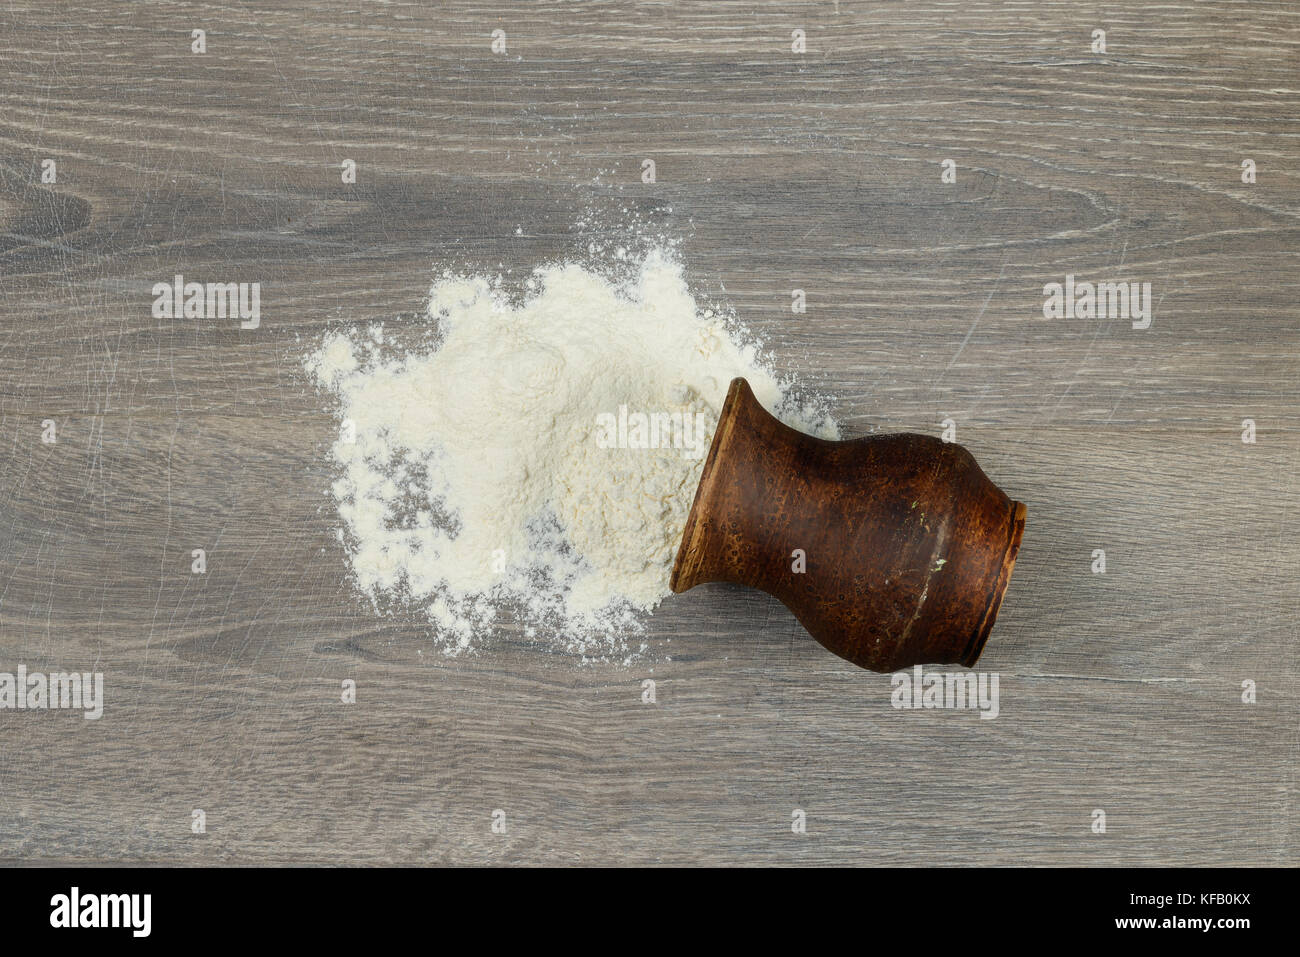 Flour scattered on the table Stock Photo